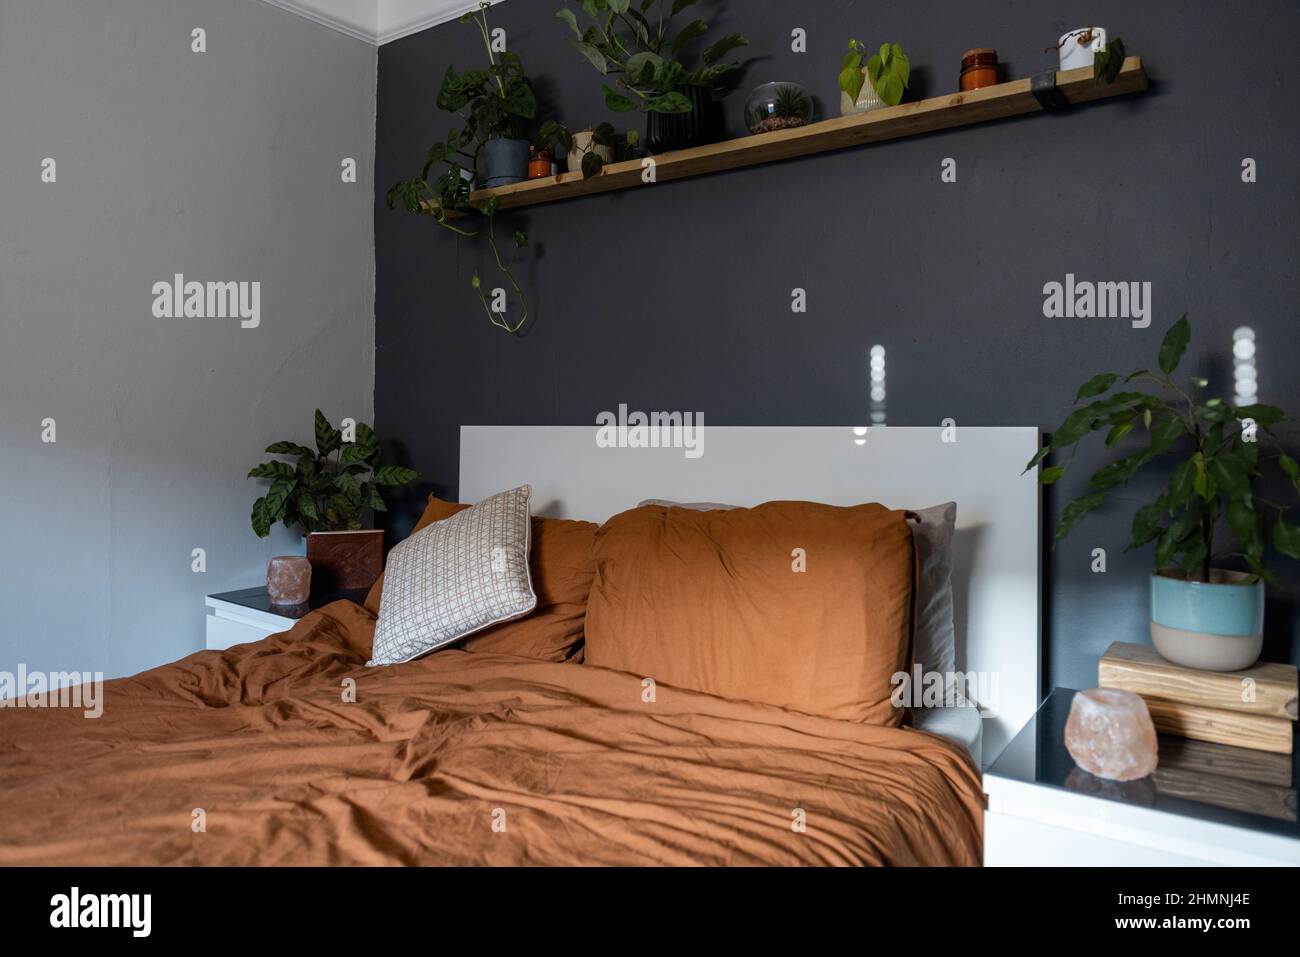 A shot of an empty bed in a bedroom decorated with house plants. Stock Photo